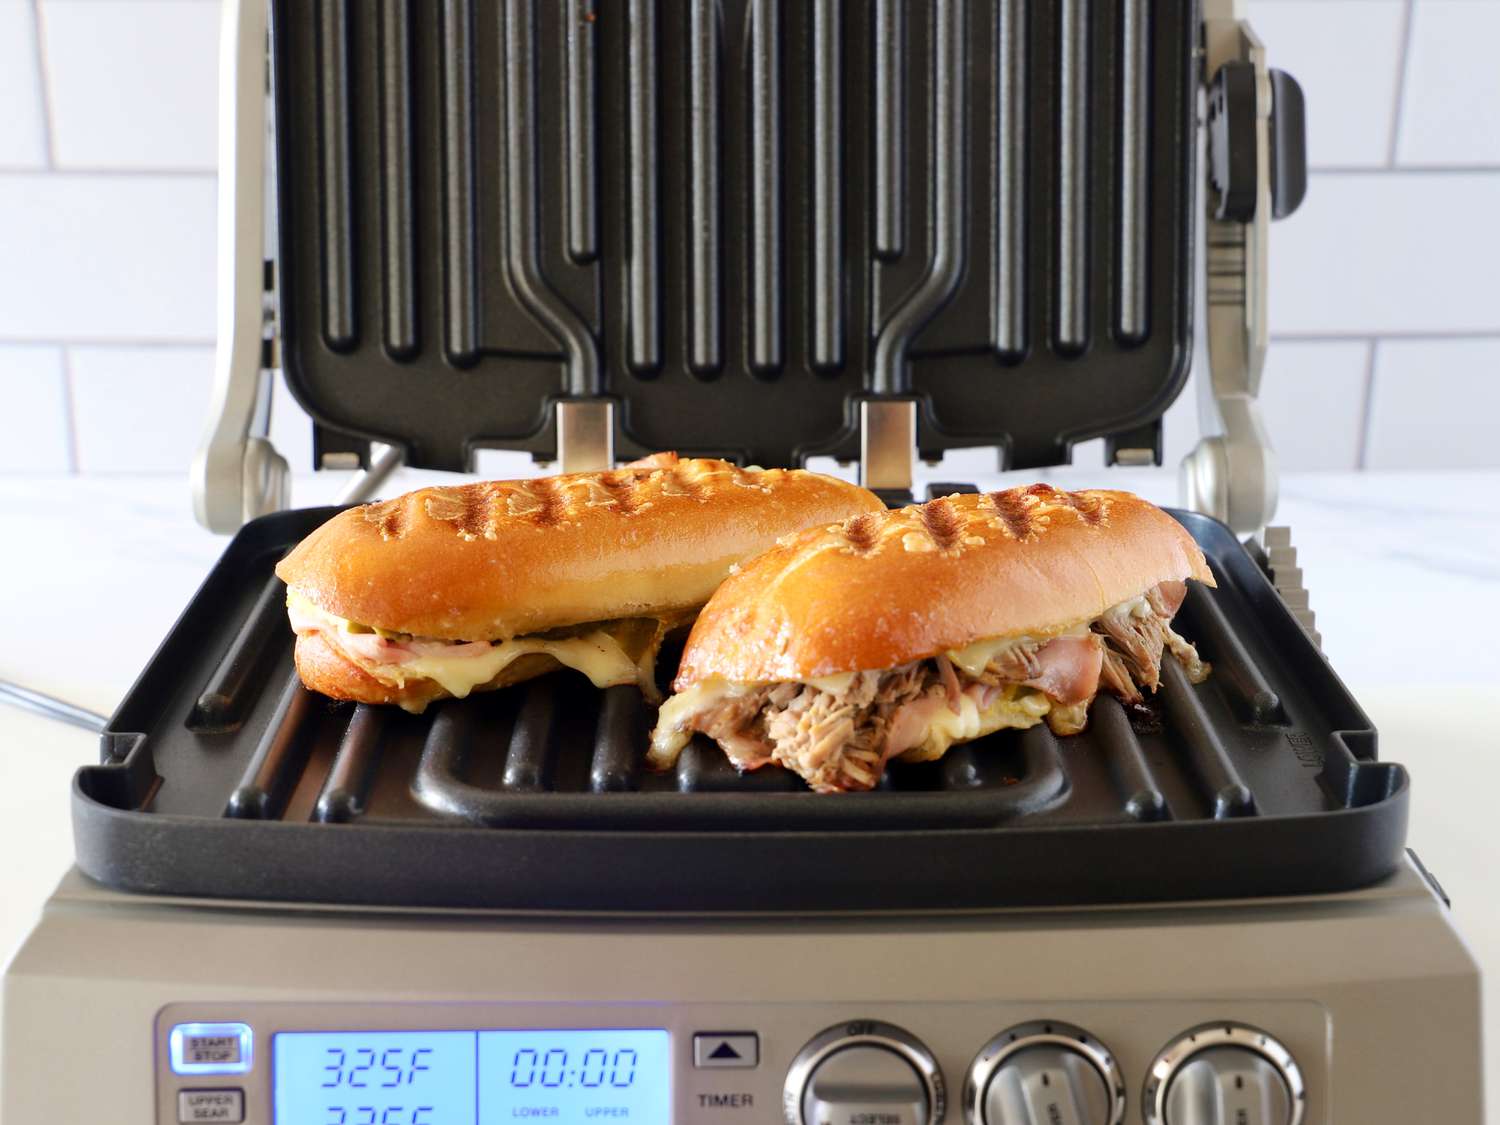 two cubano pressed sandwiches on a panini press with its lid upright